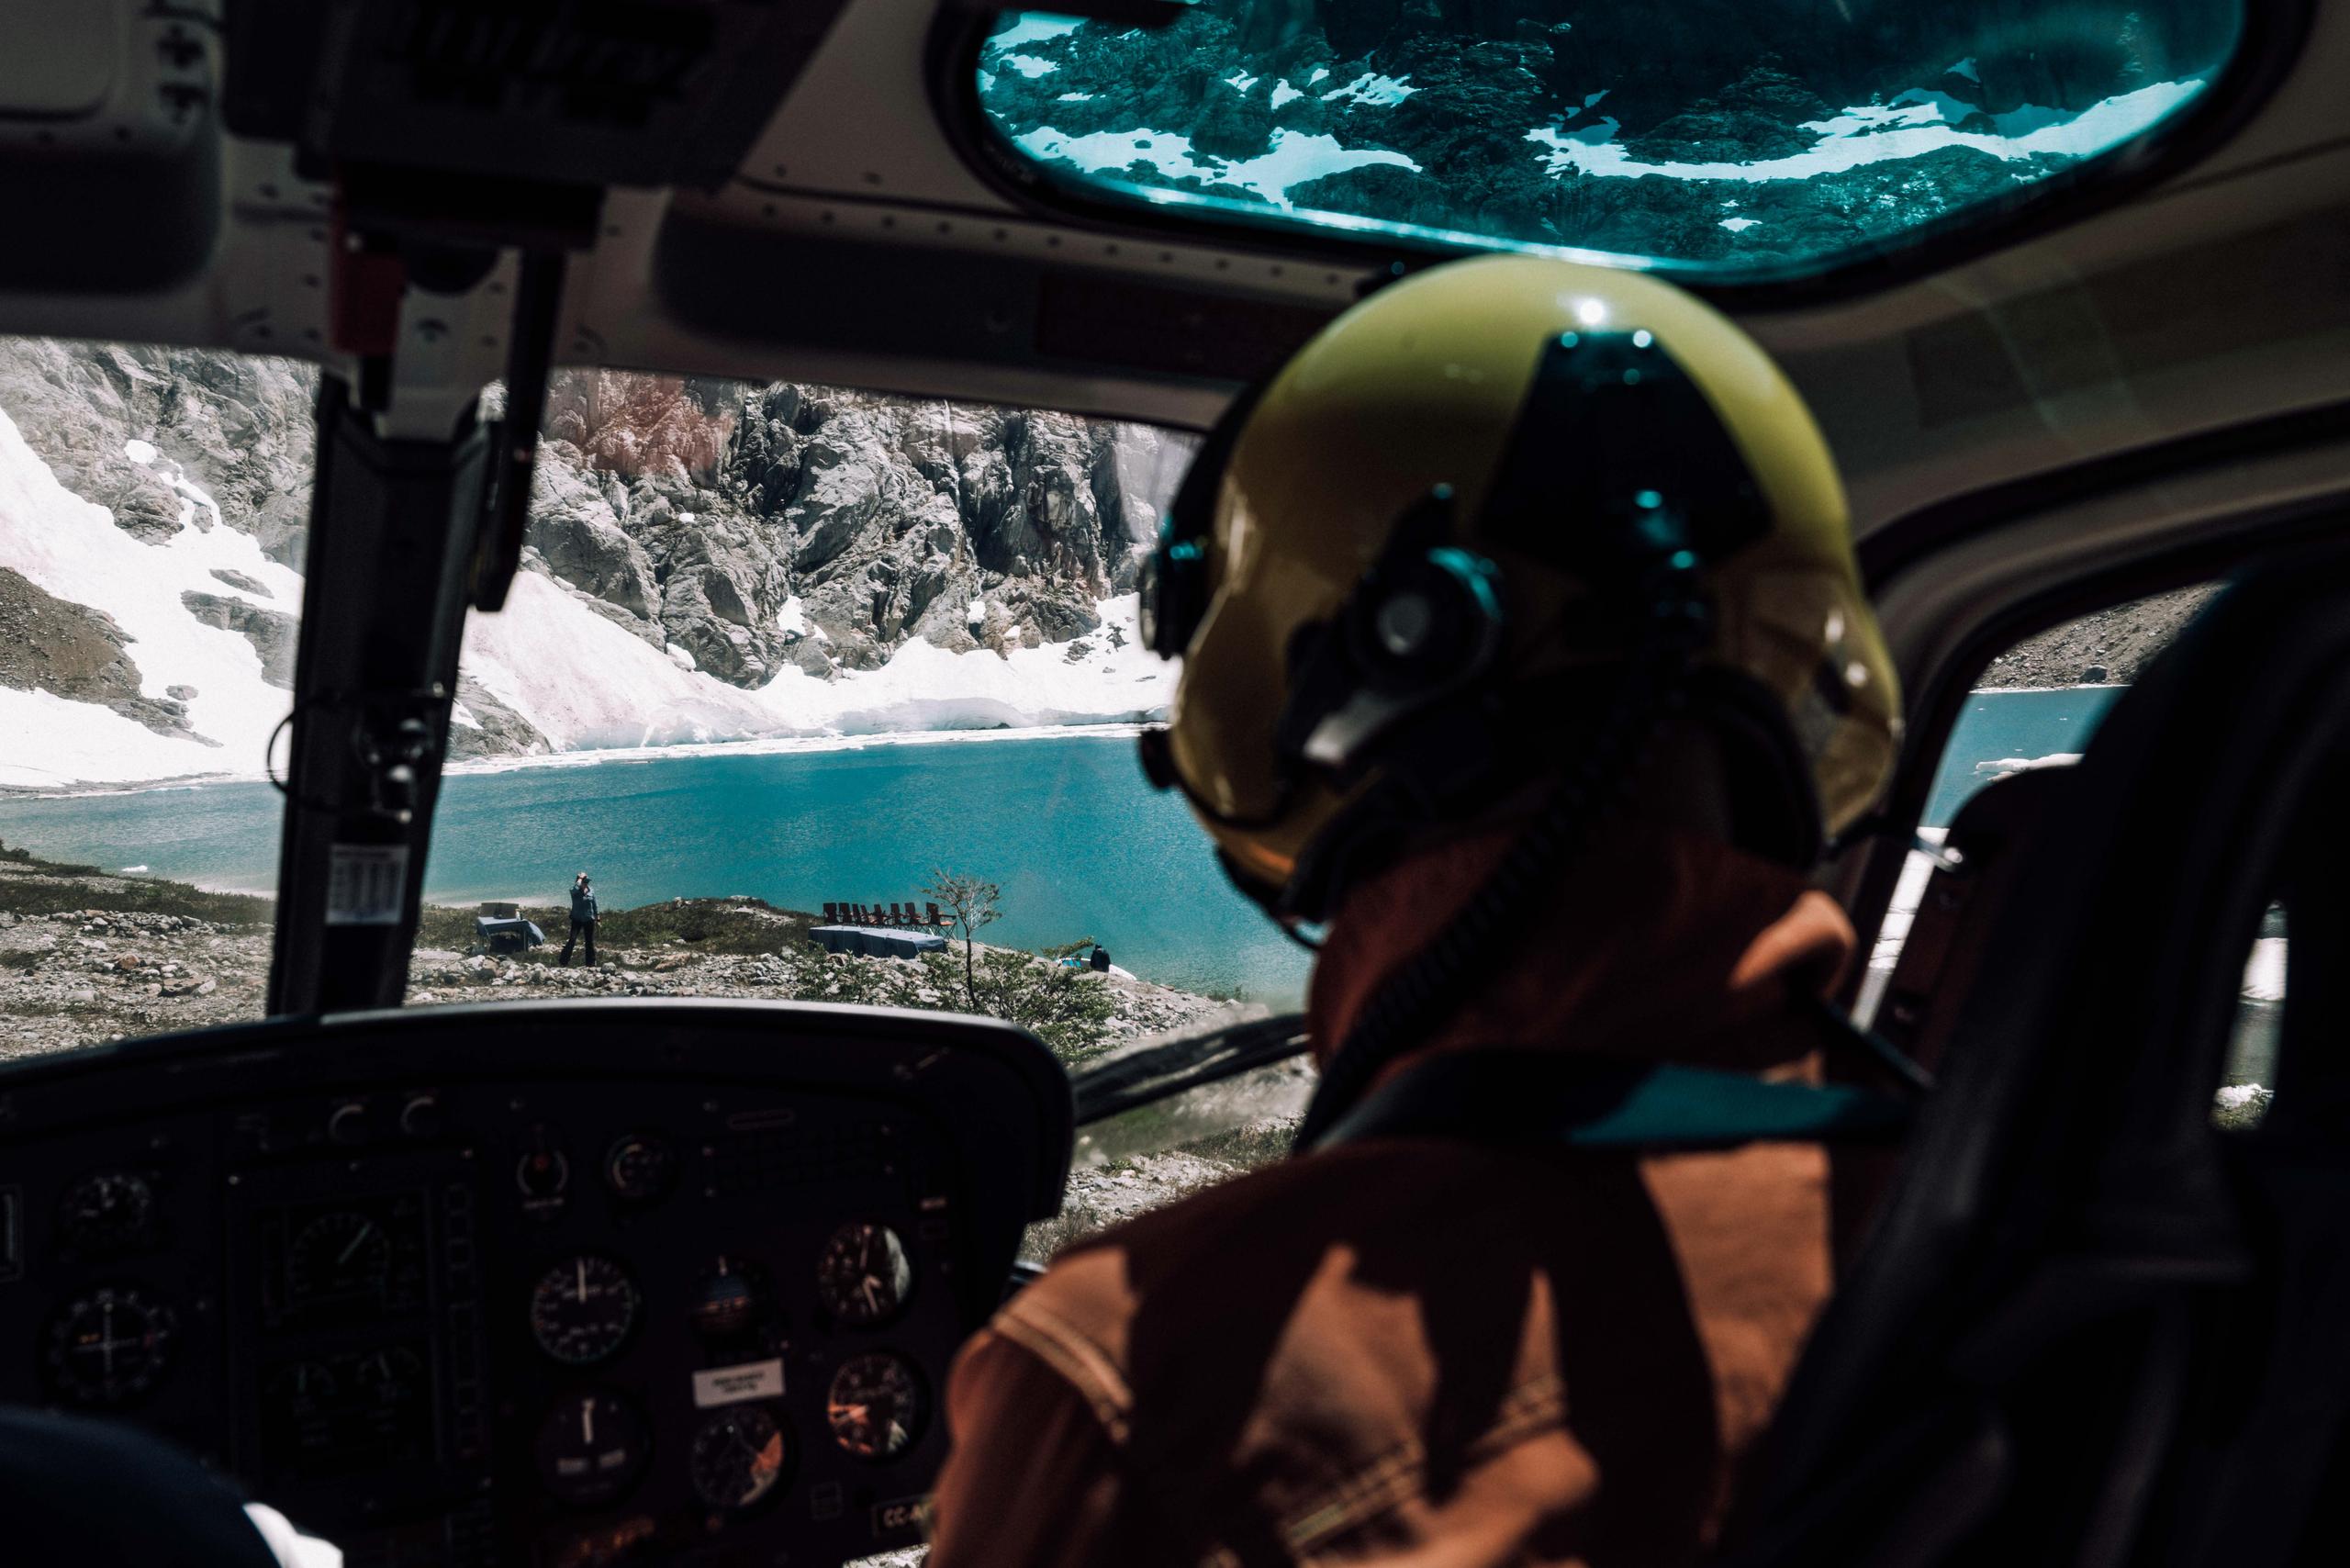 Inside helicopter view of pilot overlooking lake in Patagonia